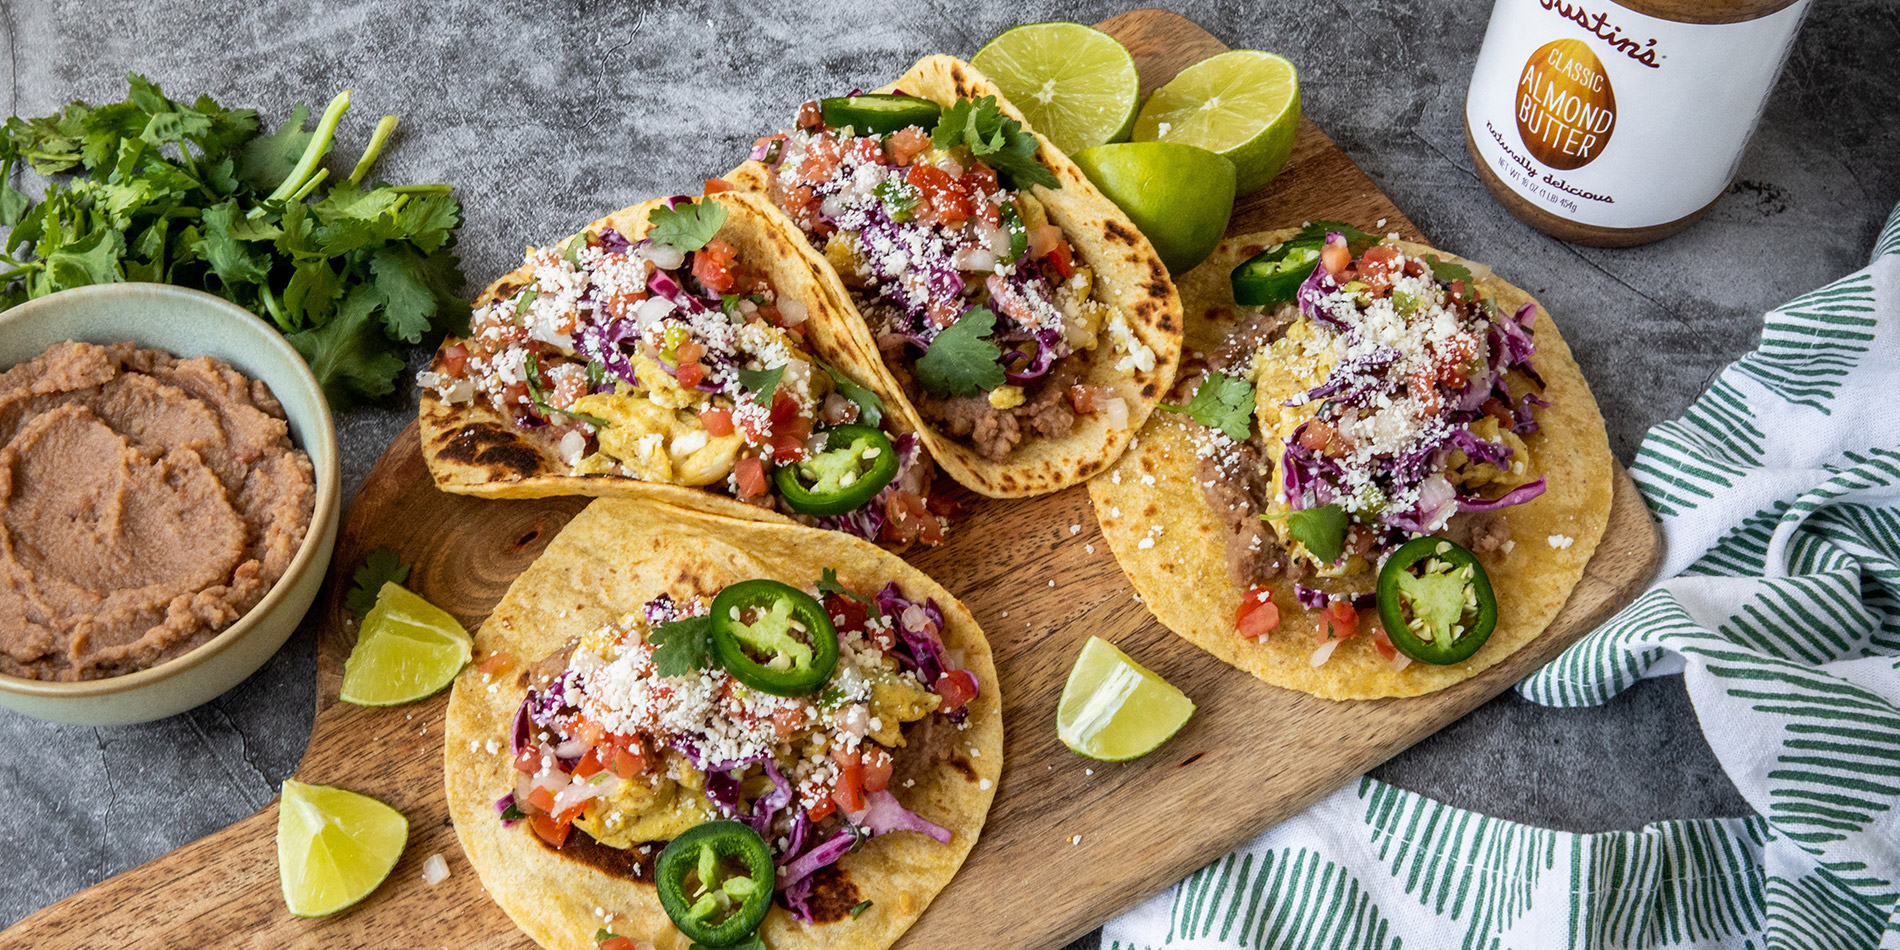 BREAKFAST TACOS WITH ALMOND BUTTER REFRIED BEANS